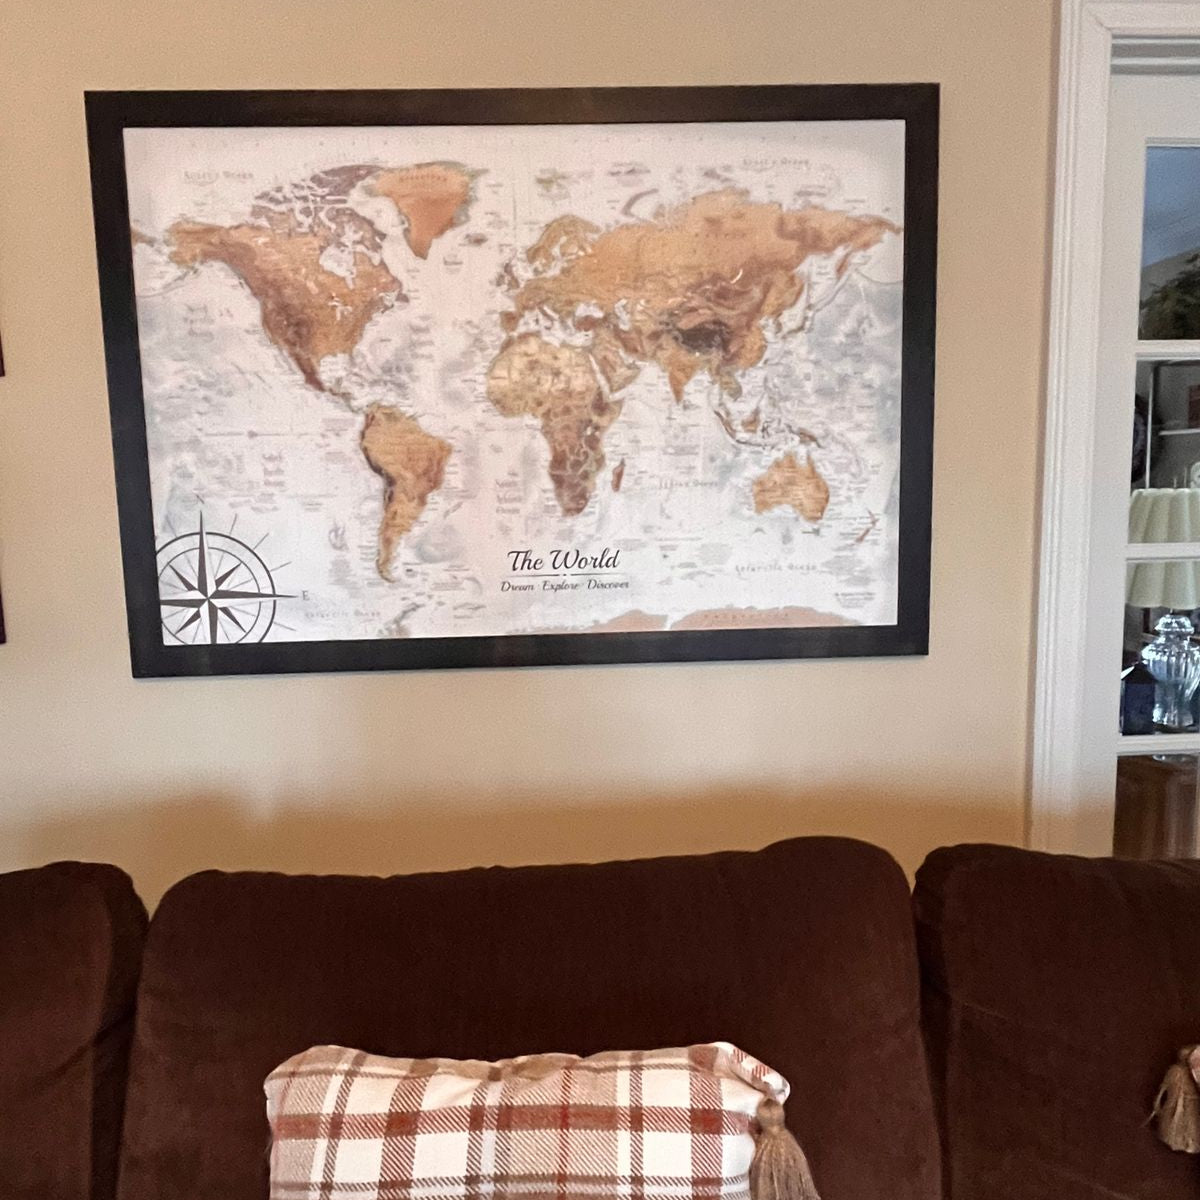 Magellan World Push Pin Travel Map Framed hanging above a couch